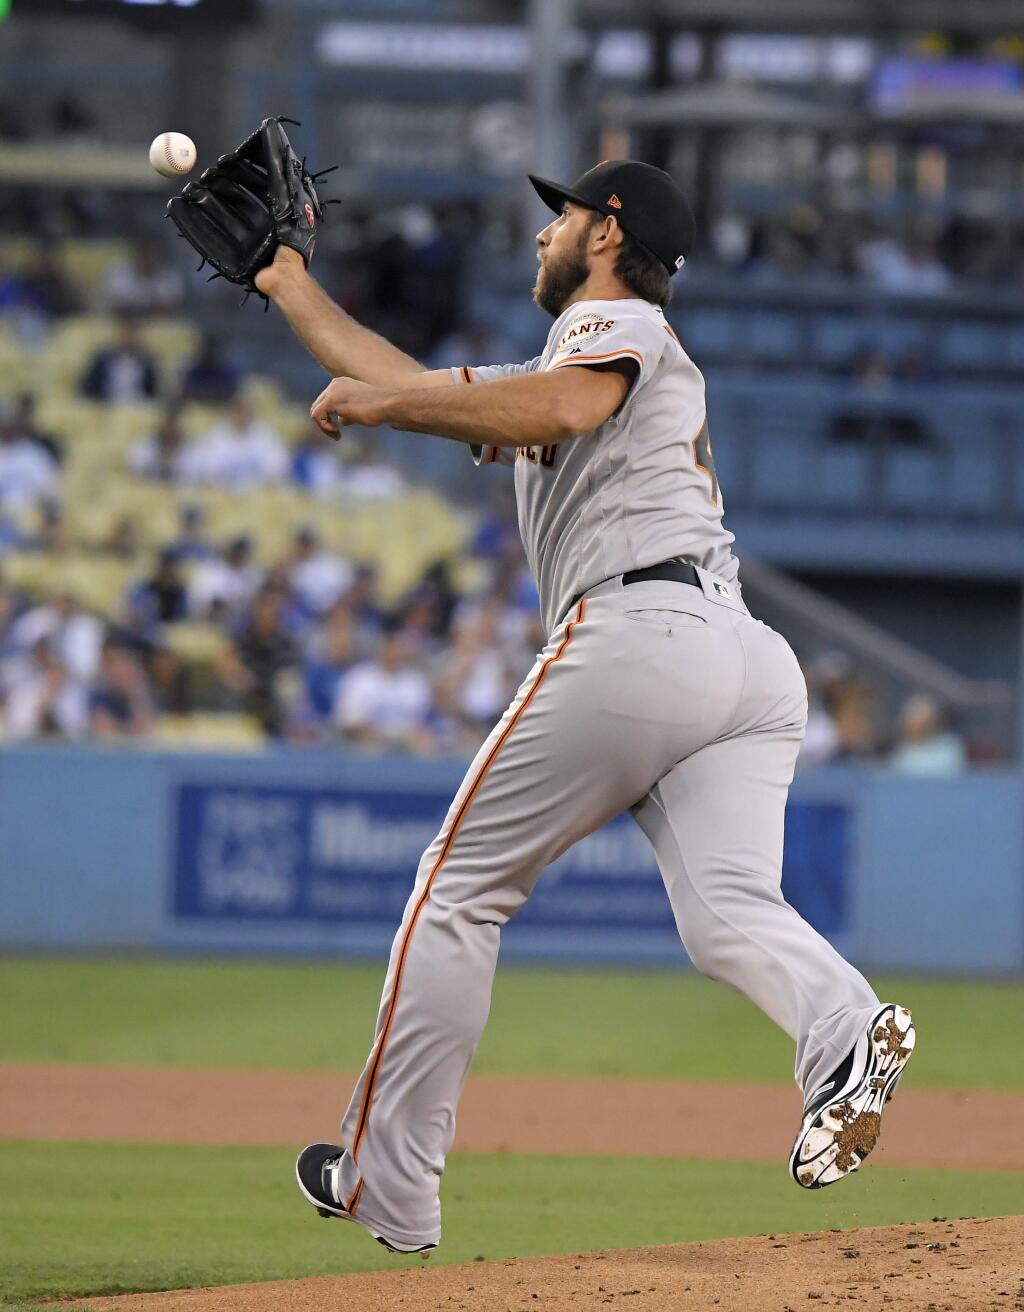 San Francisco Giants starting pitcher Madison Bumgarner fields a ball hit by Los Angeles Dodgers' Manny Machado during the first inning of a baseball game Monday, Aug. 13, 2018, in Los Angeles. Bumgarner threw out Brian Dozier at second as he advanced on the play. Machado was safe at first. (AP Photo/Mark J. Terrill)